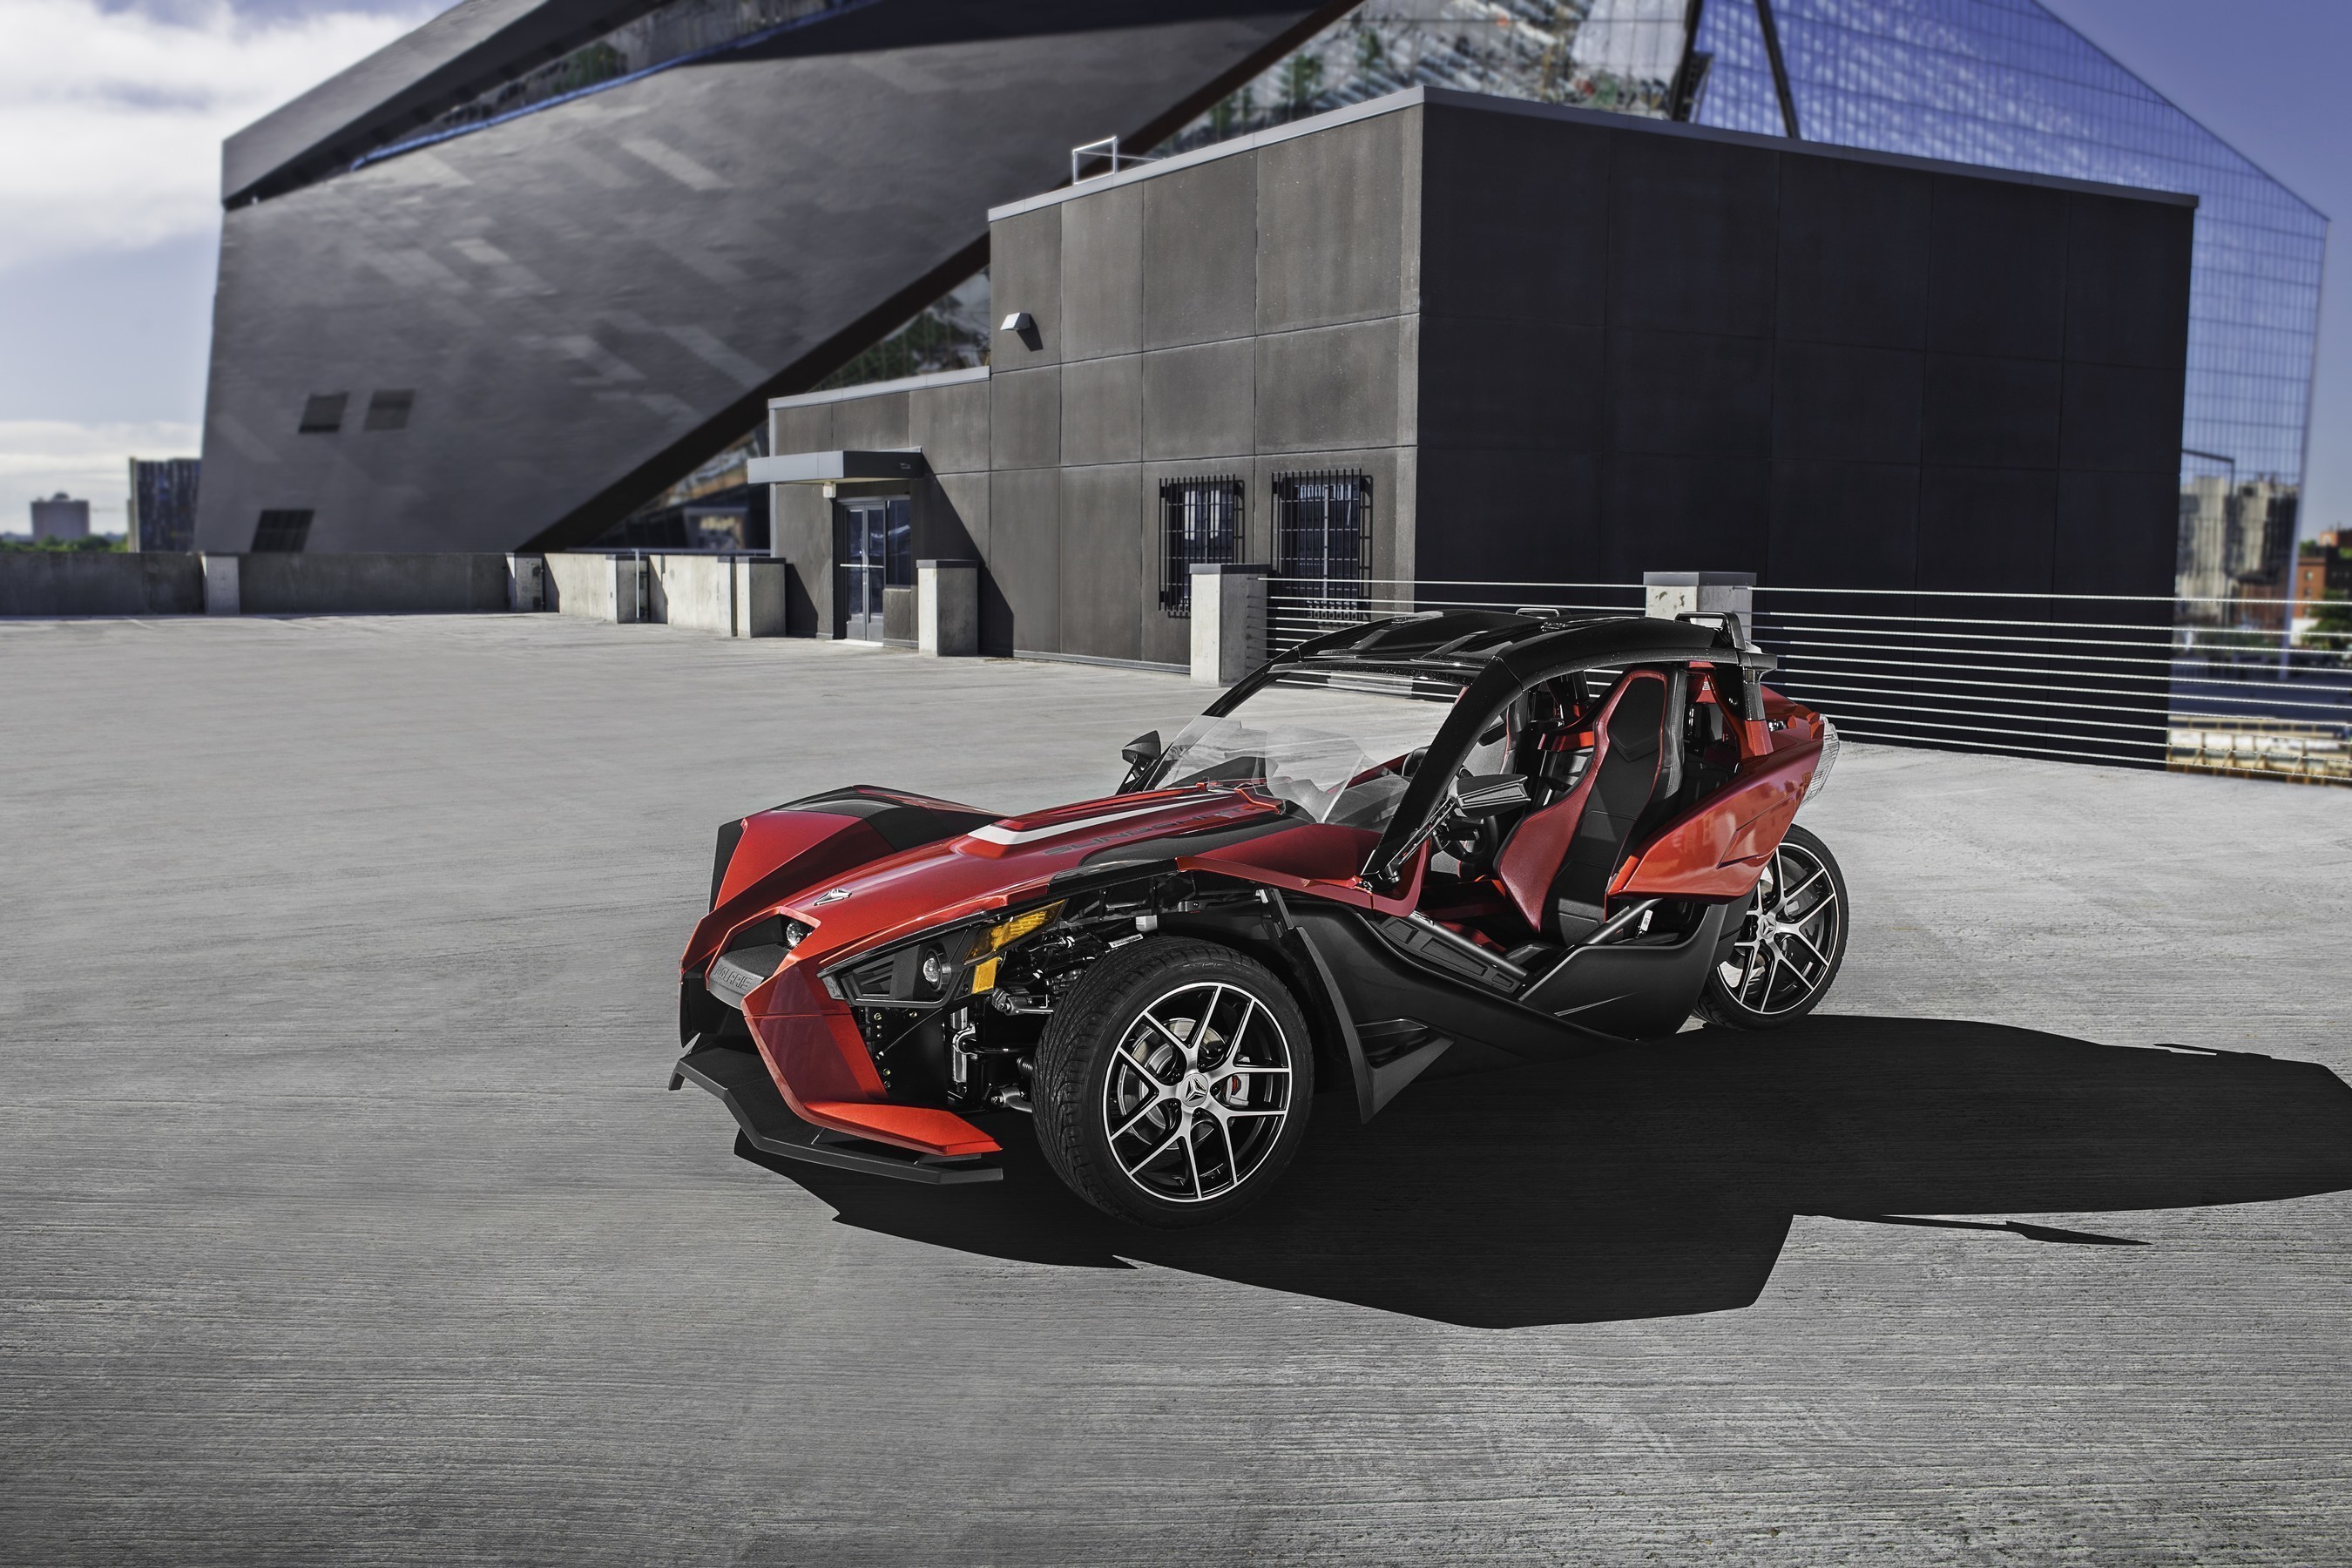 With 31 new accessories for 2017, Polaris Slingshot is working to meet owner's needs. Heading up the new accessory lineup is the Slingshade, a removable sunshade that is fully integrated with the Slingshot's design and provides shade on the road.